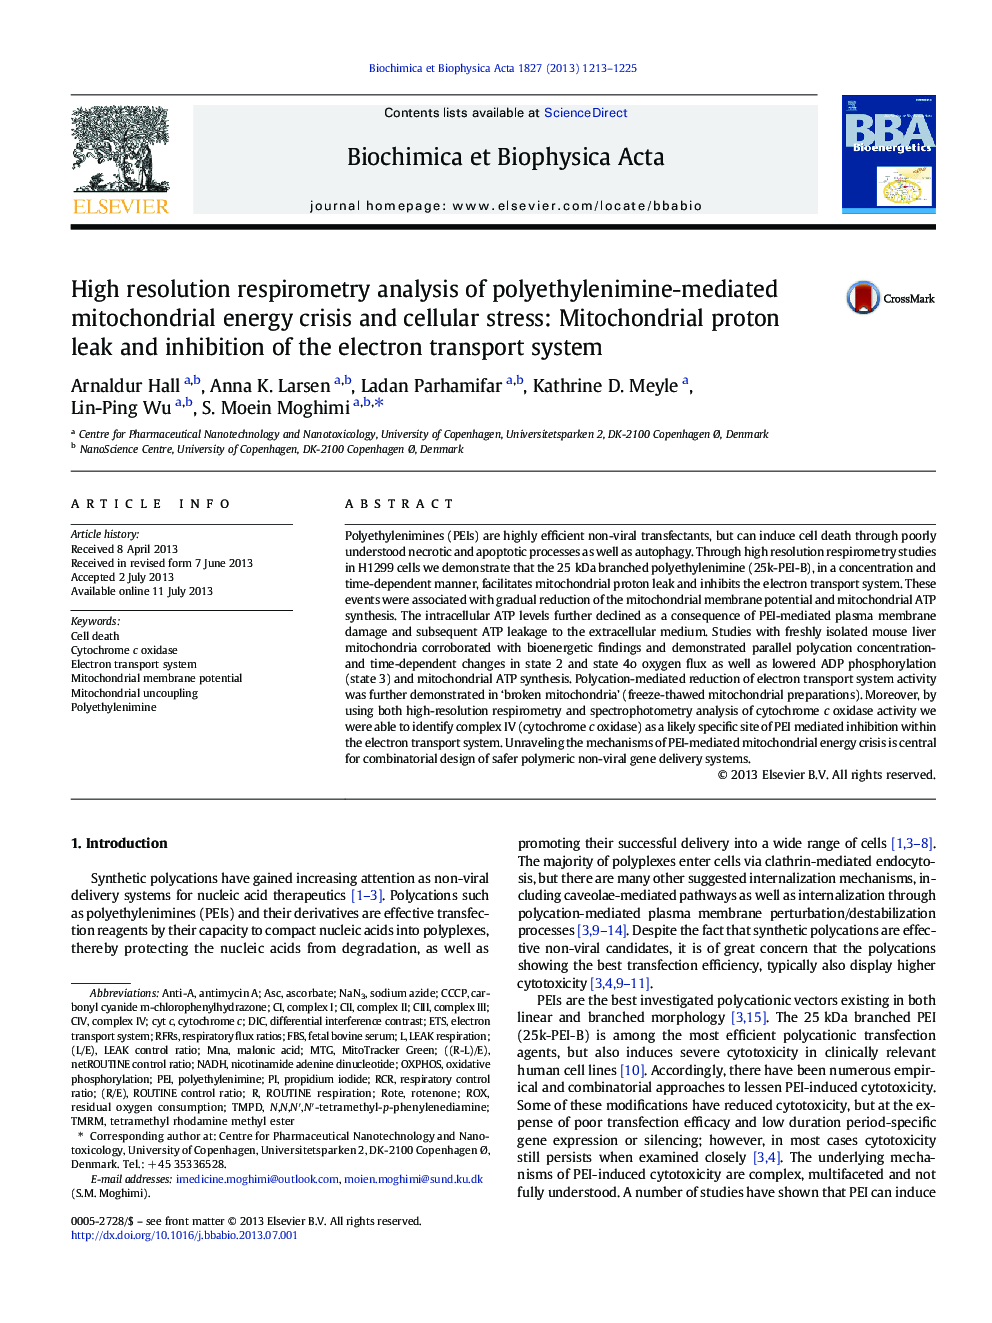 High resolution respirometry analysis of polyethylenimine-mediated mitochondrial energy crisis and cellular stress: Mitochondrial proton leak and inhibition of the electron transport system